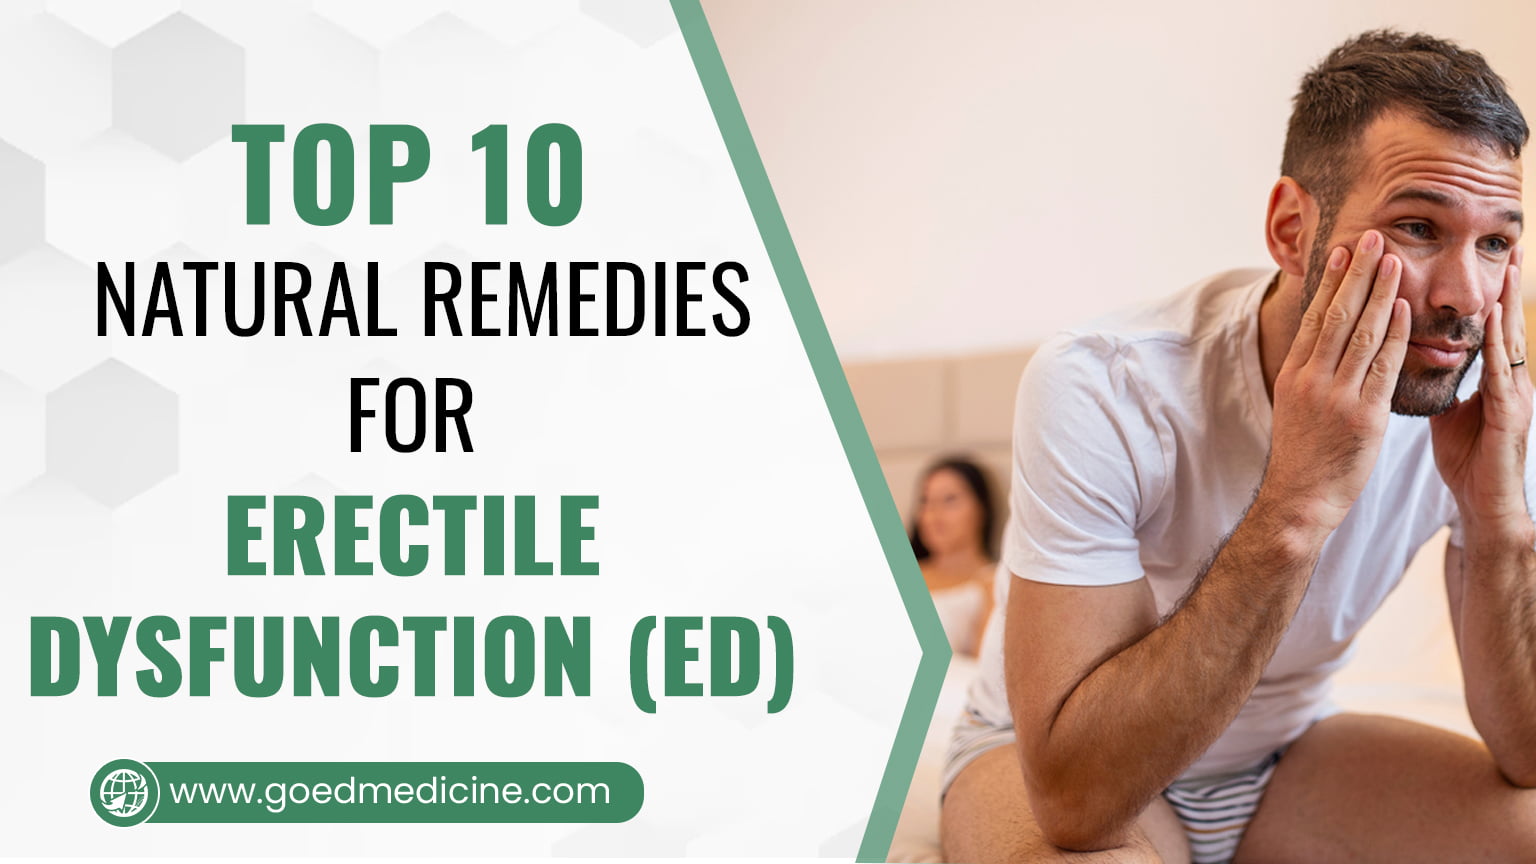 Top 10 Natural Remedies for Erectile Dysfunction(ED)